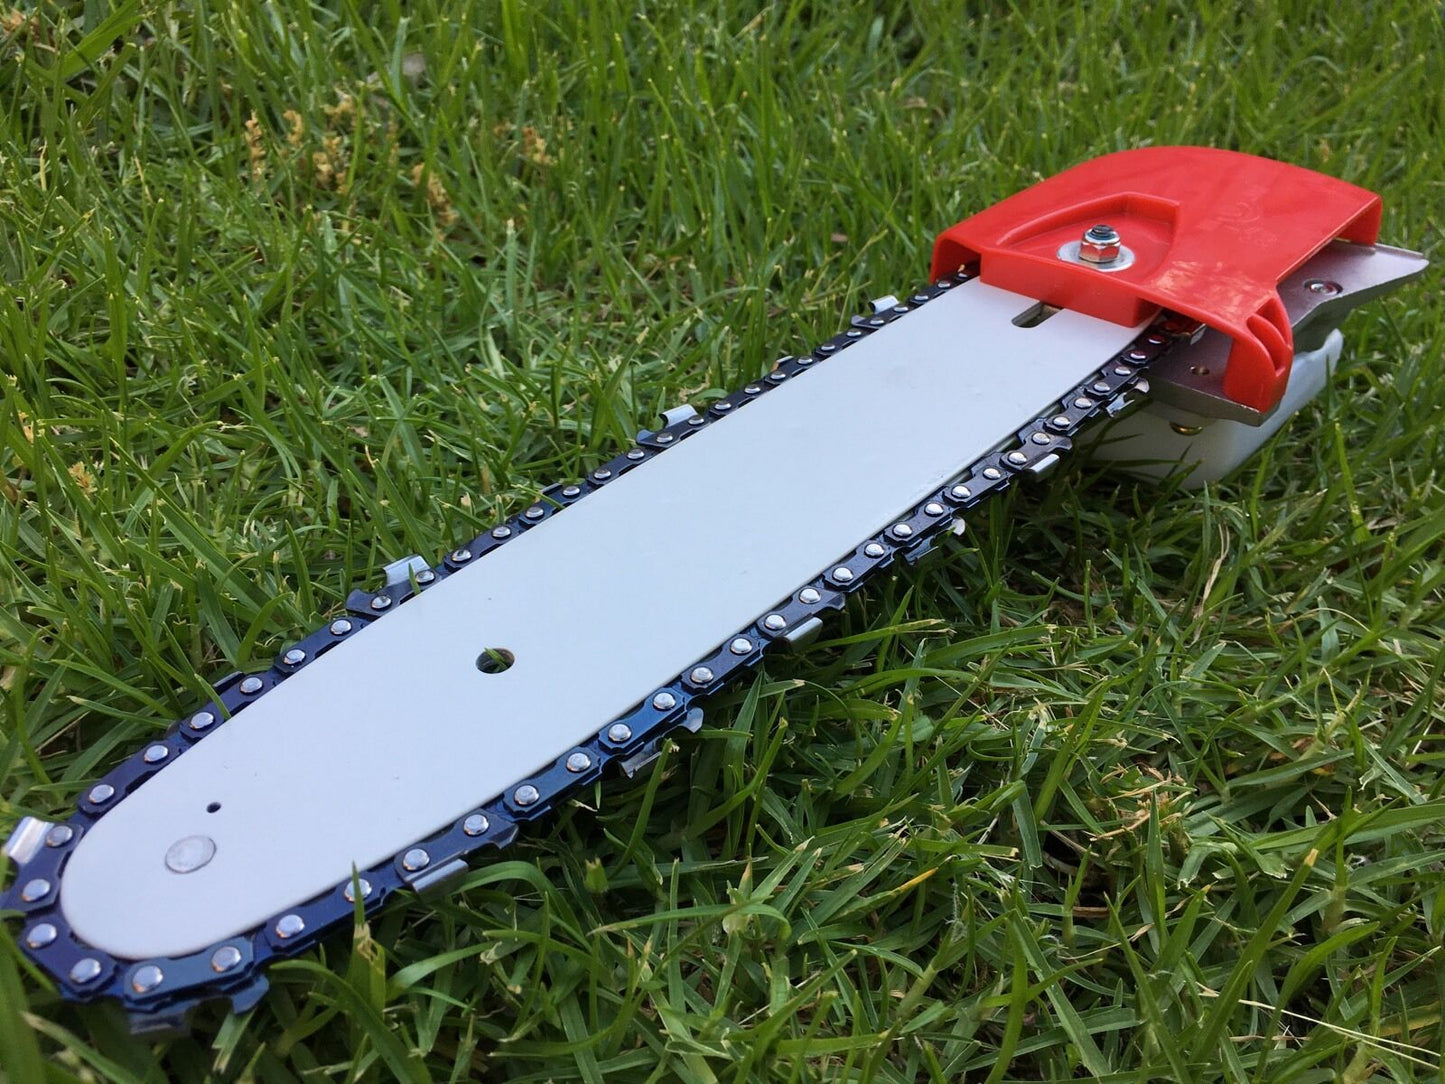 Chainsaw Head 10" Bar & 2 Chain - Fit 24mm Pole w/5mm Square Shaft grass trimmer